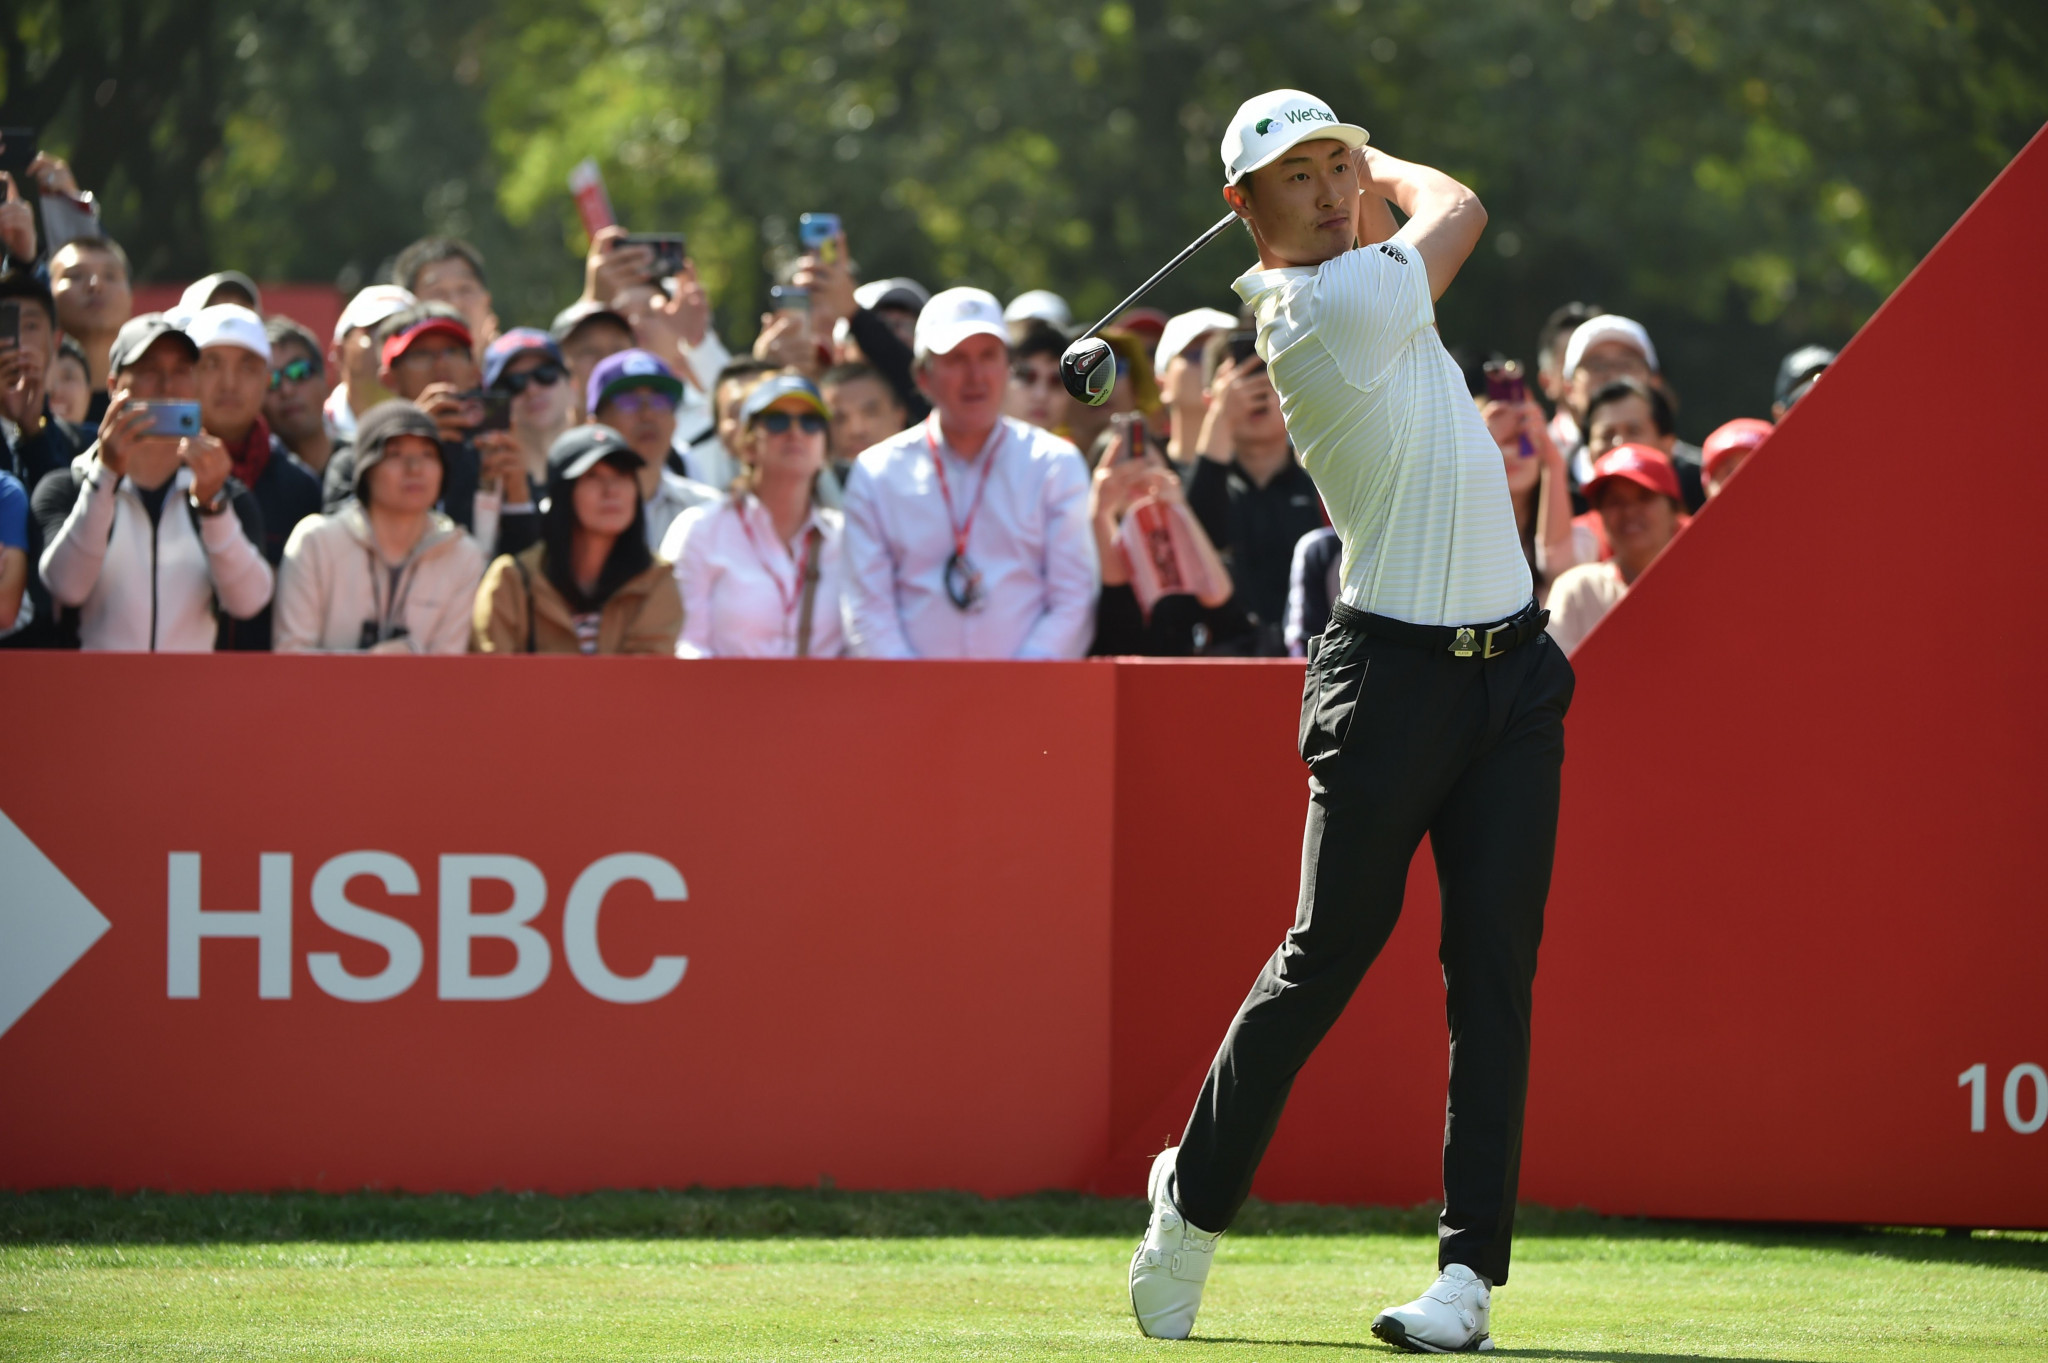 Li on top with McIlroy solid at WGC-HSBC Champions